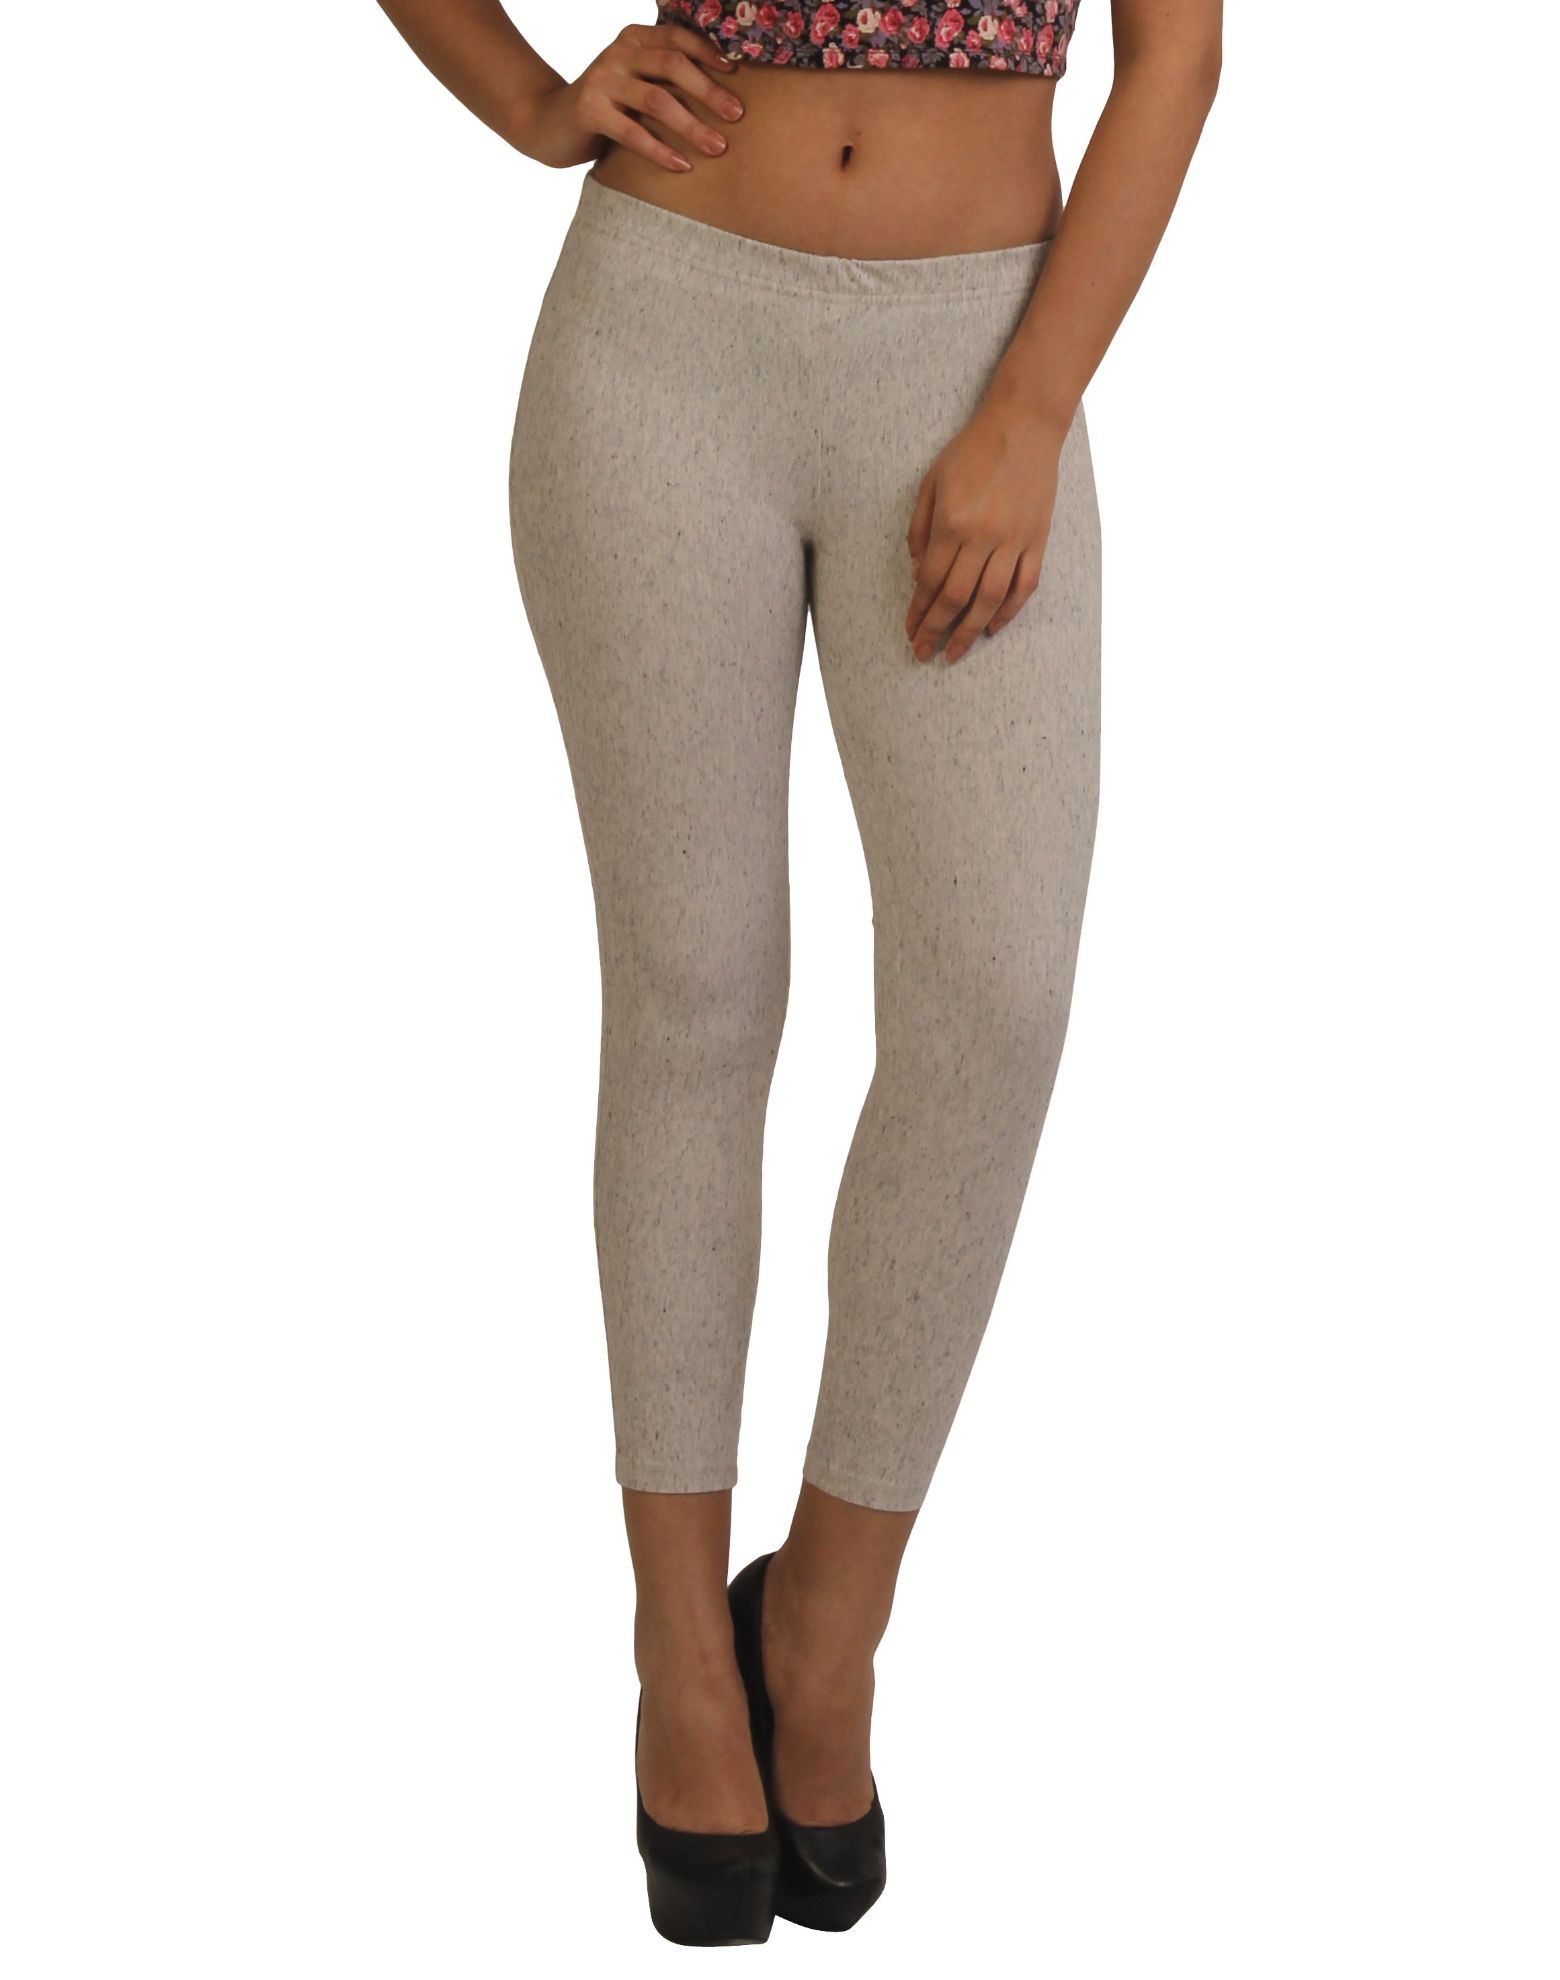 https://frenchtrendz.com/images/thumbs/0006640_frenchtrendz-cotton-modal-spandex-grey-jeggings.jpeg